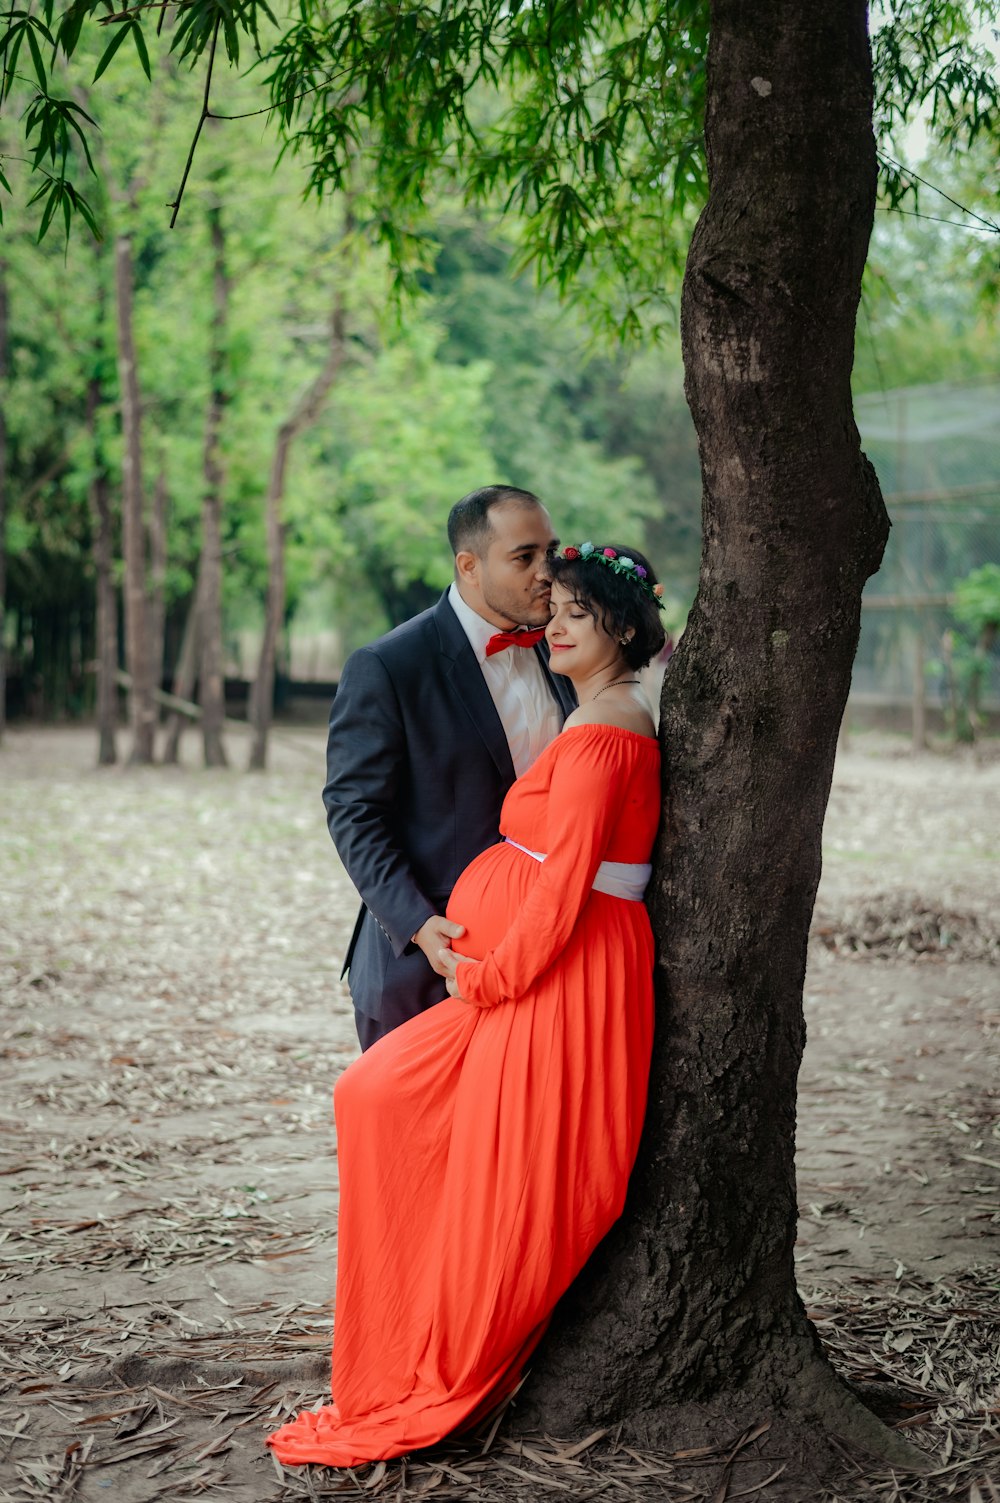 a man in a suit and woman in an orange dress leaning against a tree